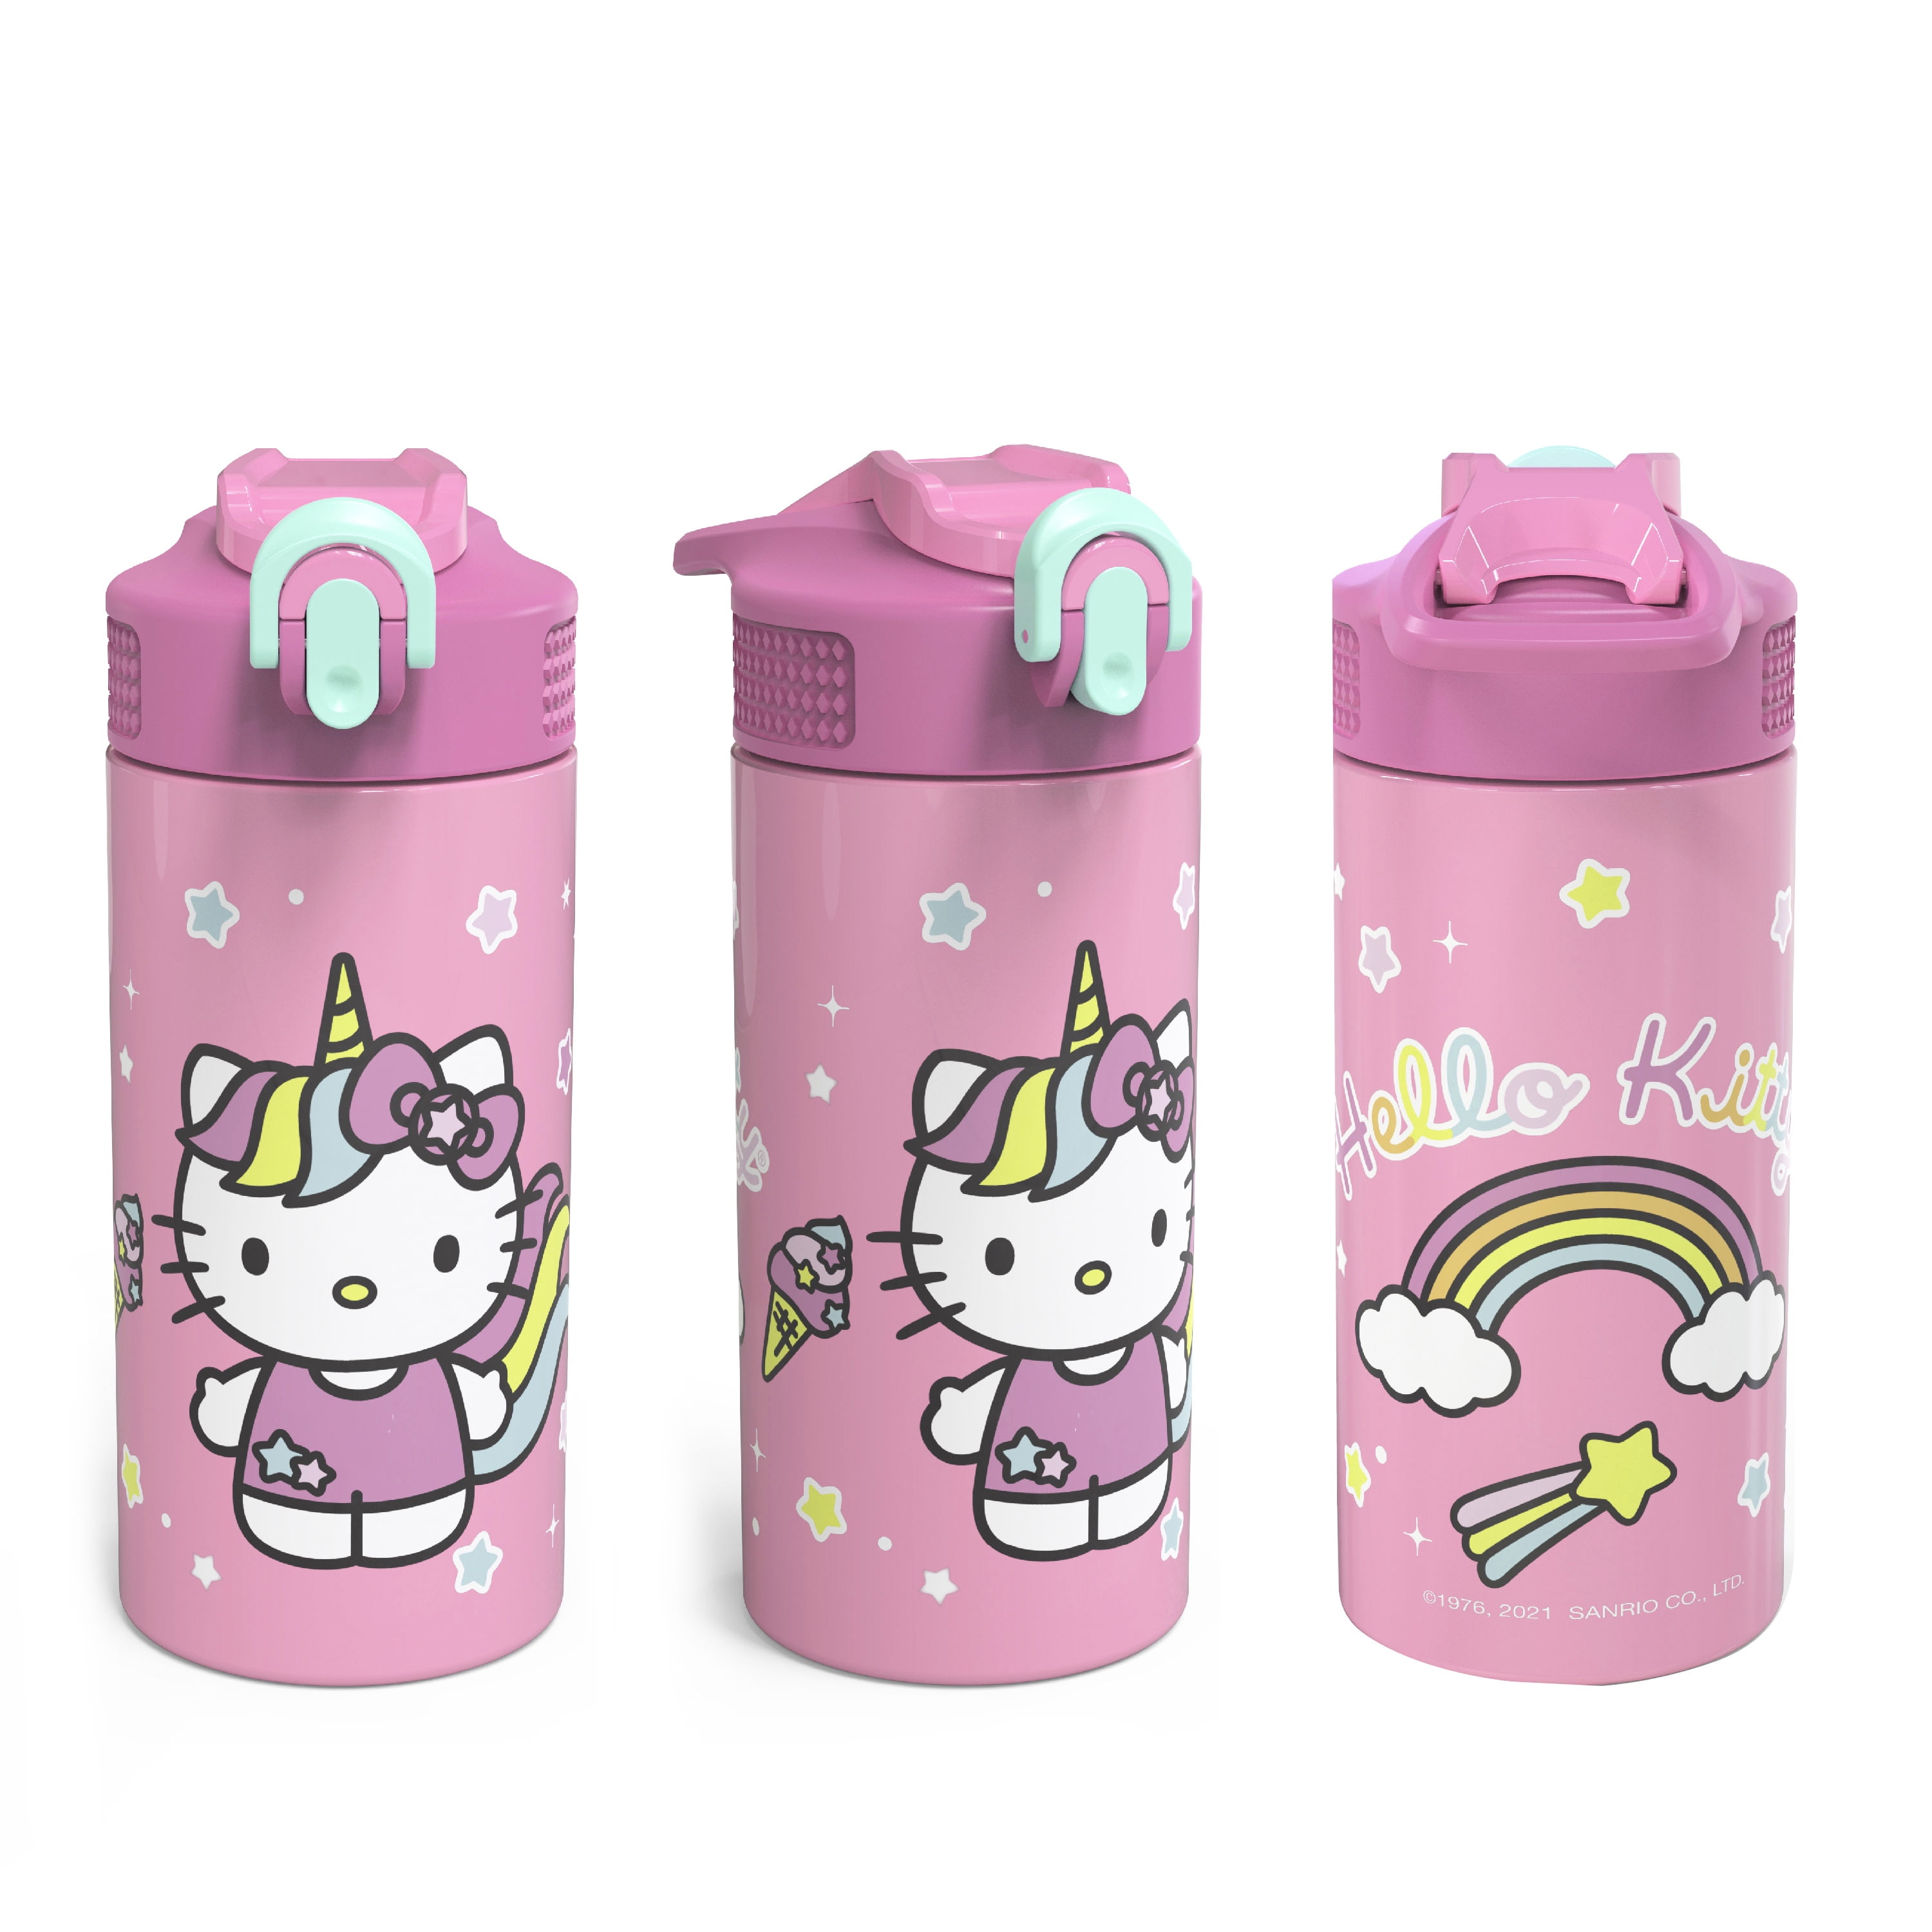 Softlife Insulated Kids Water Bottle With Hand Bag,Double Wall